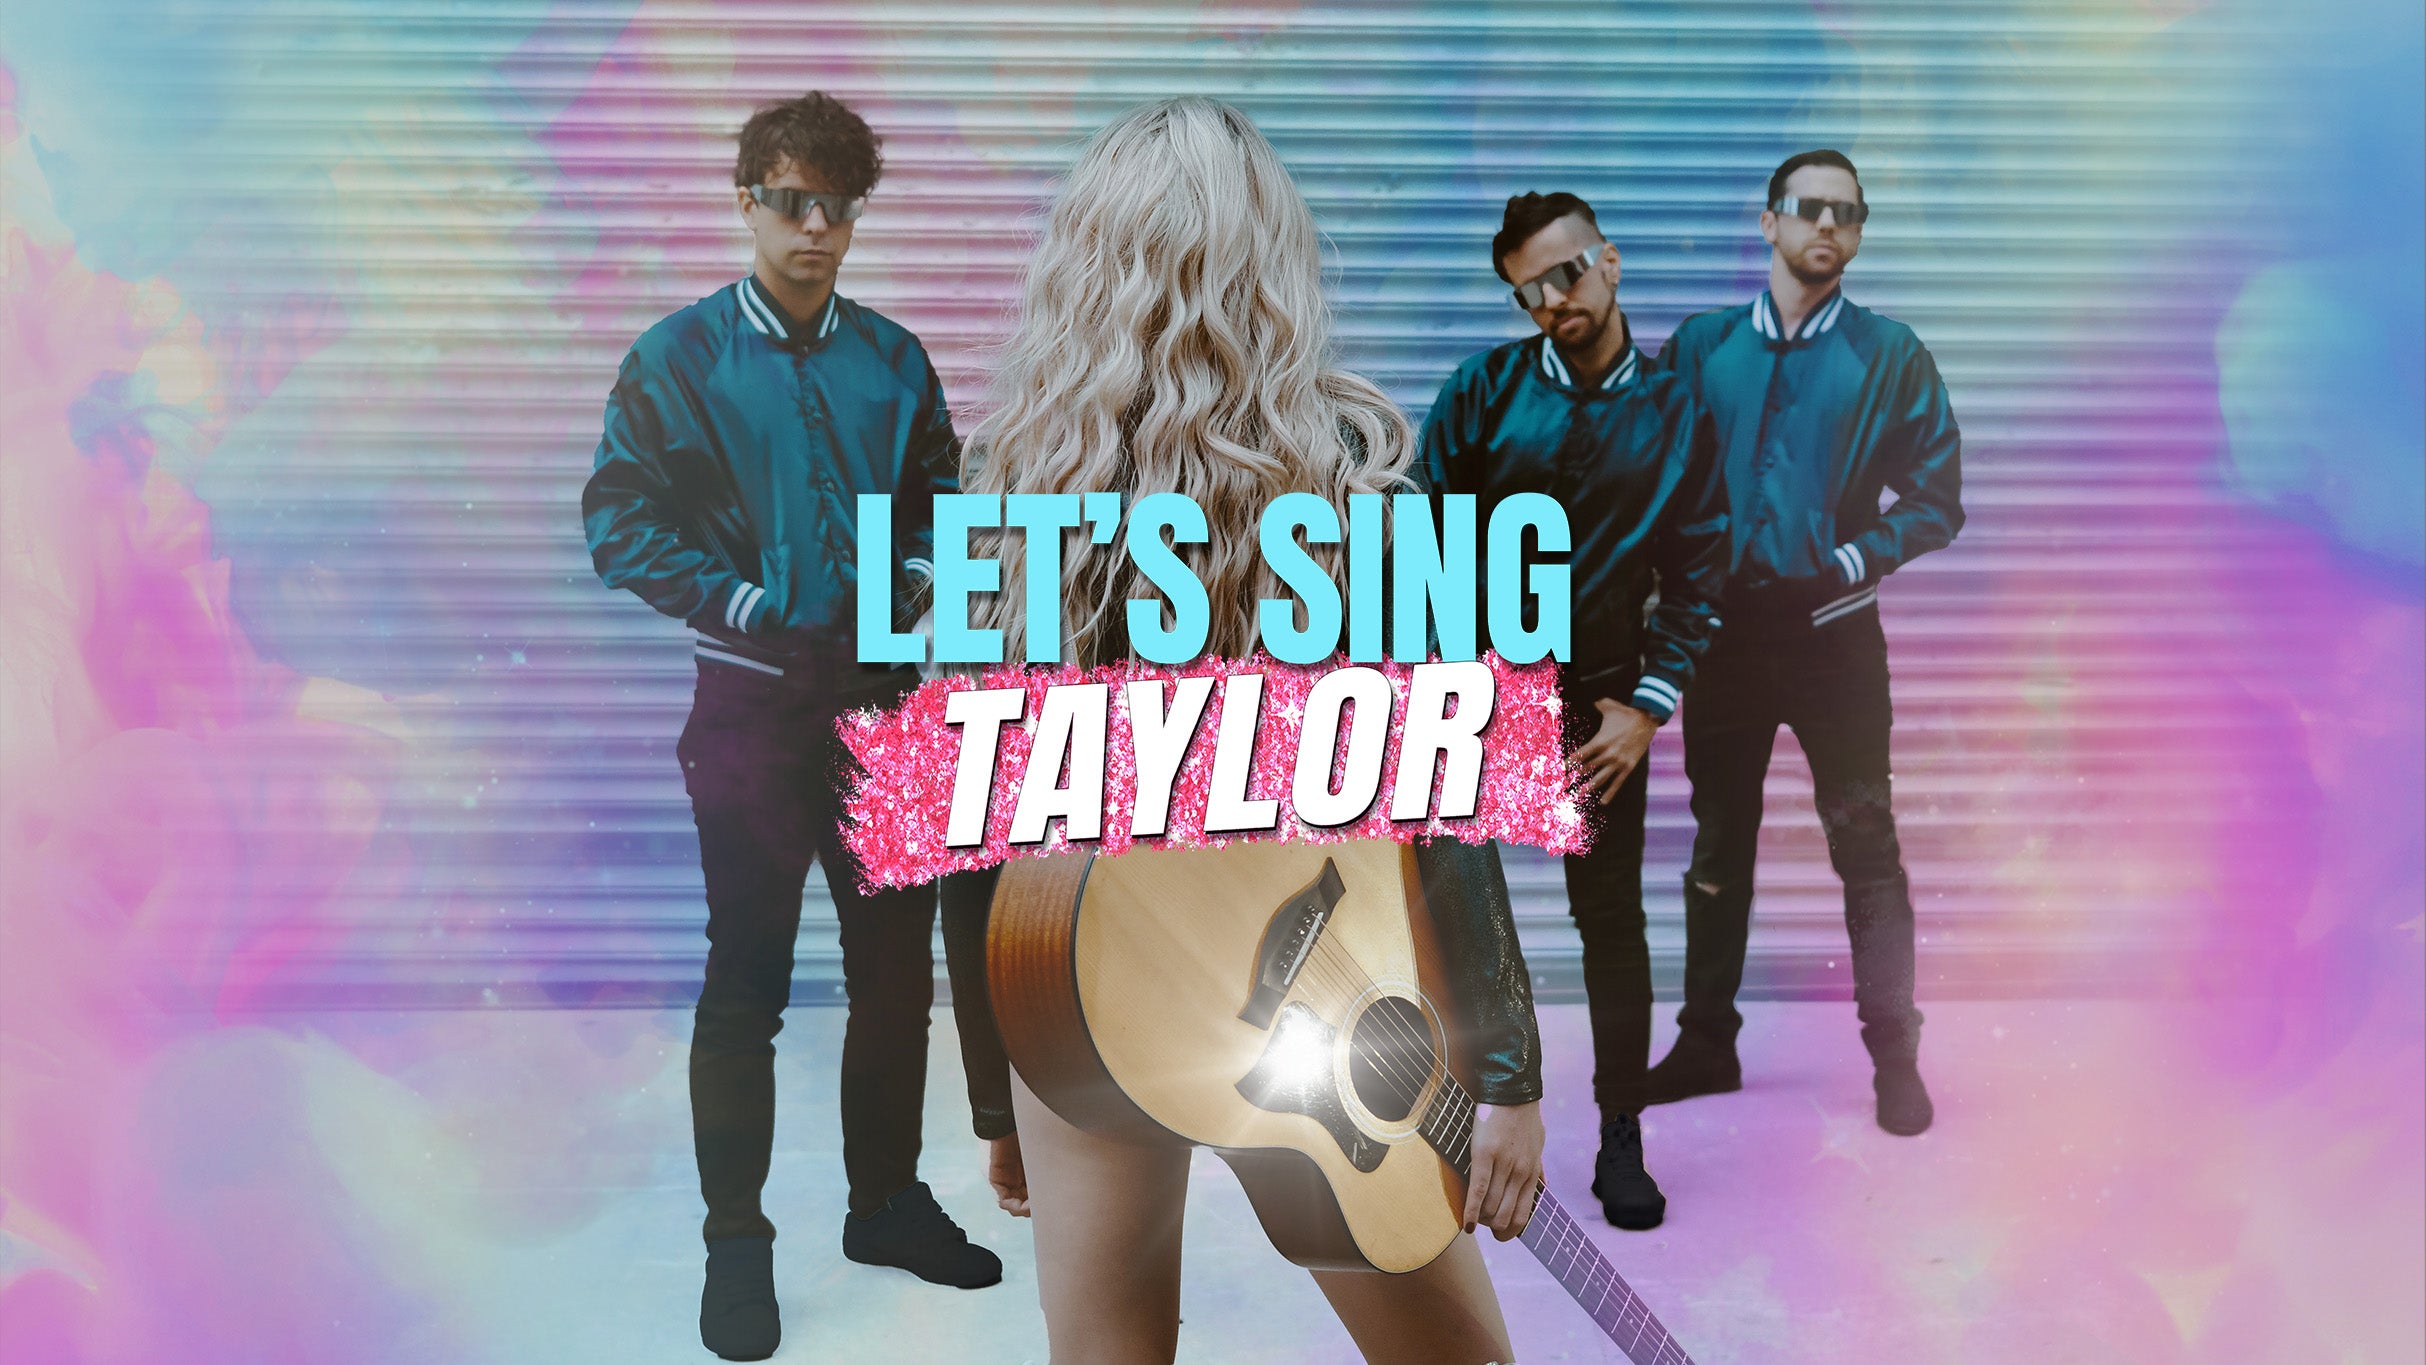 Let’s Sing Taylor - A Live Band Experience Celebrating Taylor Swift pre-sale code for show tickets in El Cajon, CA (The Magnolia)